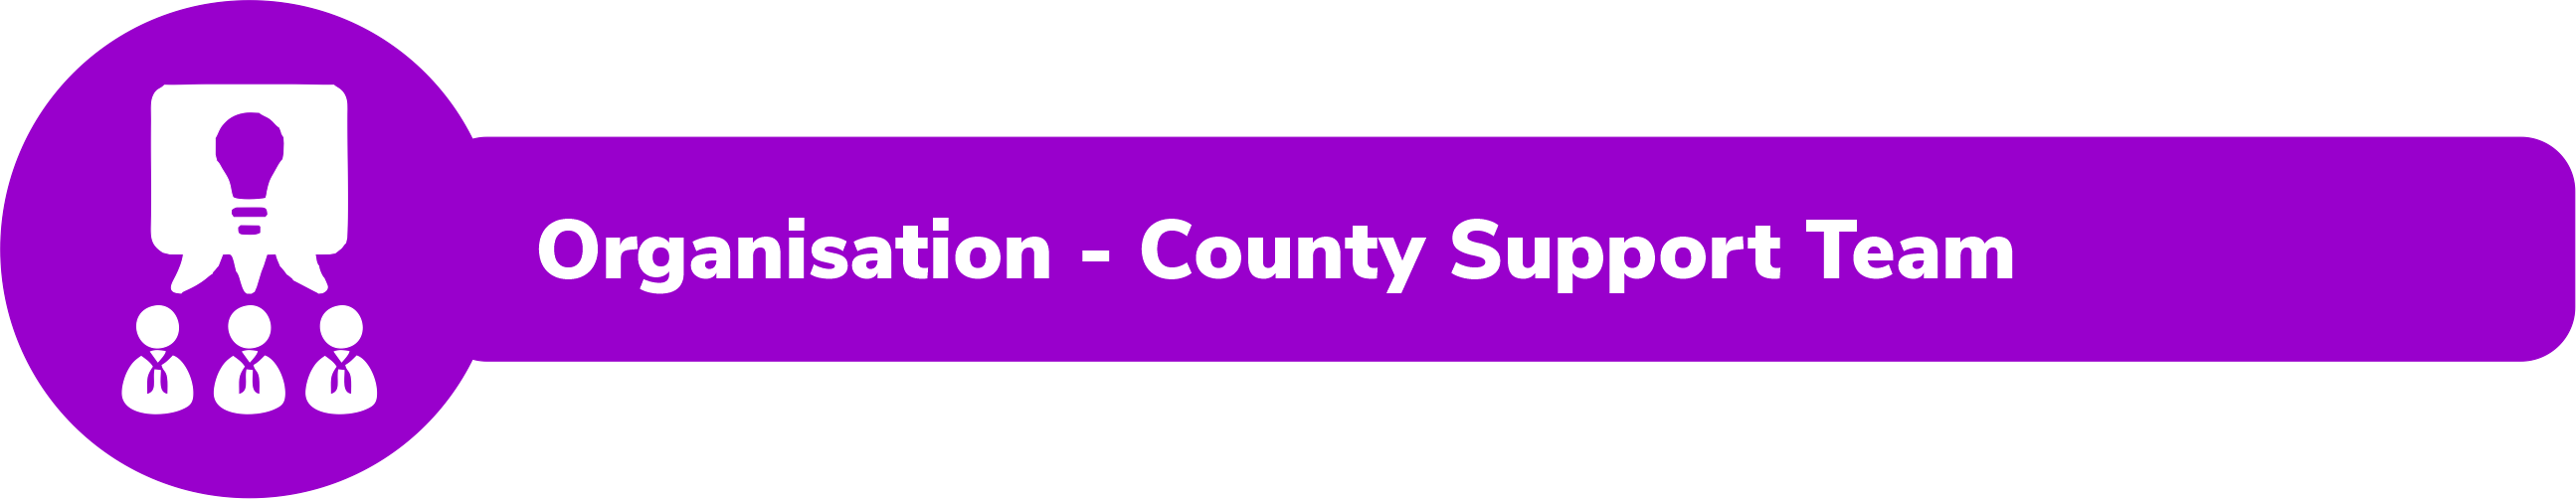 County Support Team